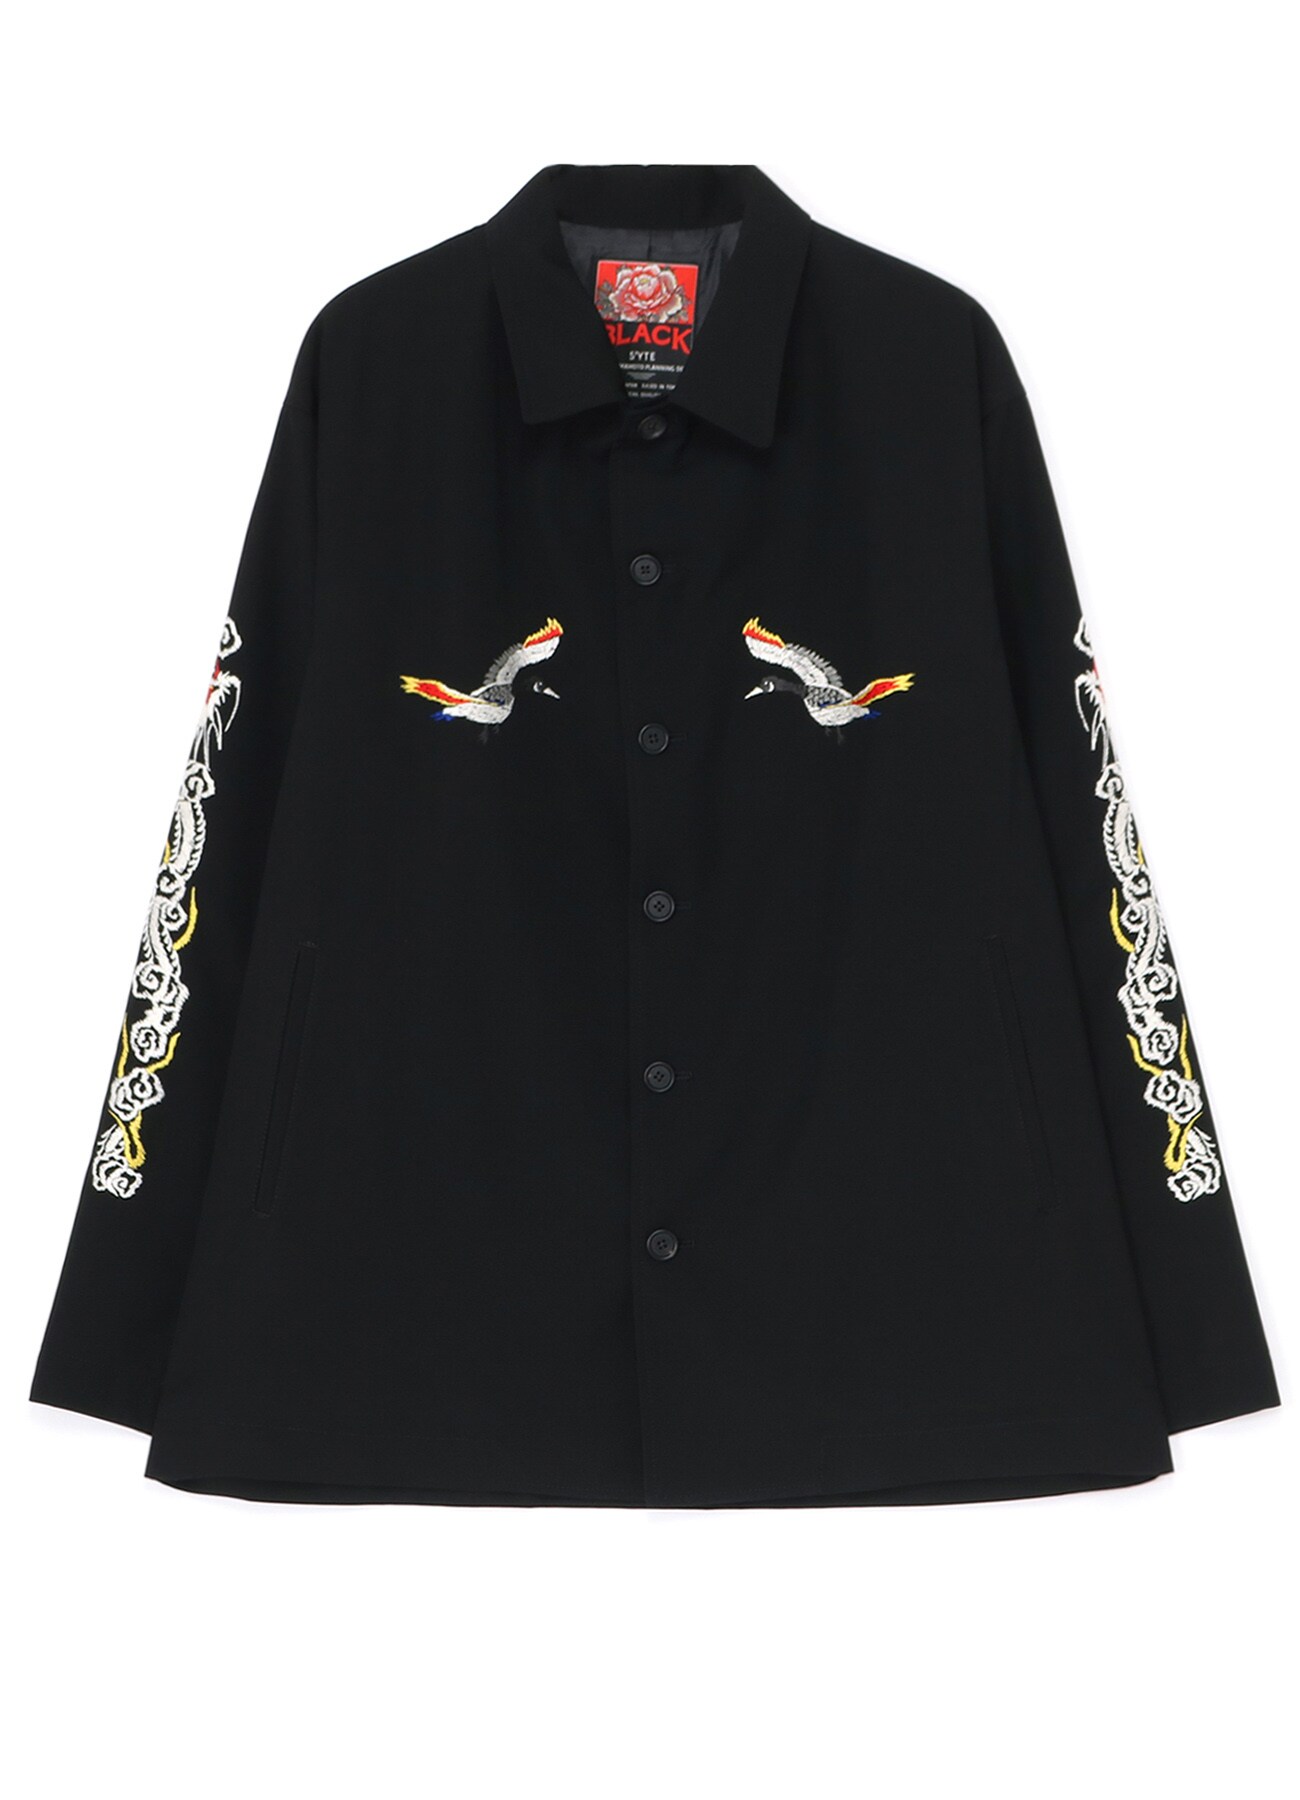 POLYESTER GABARDINE EMBROIDERED COACH JACKET(M Black): S'YTE｜THE